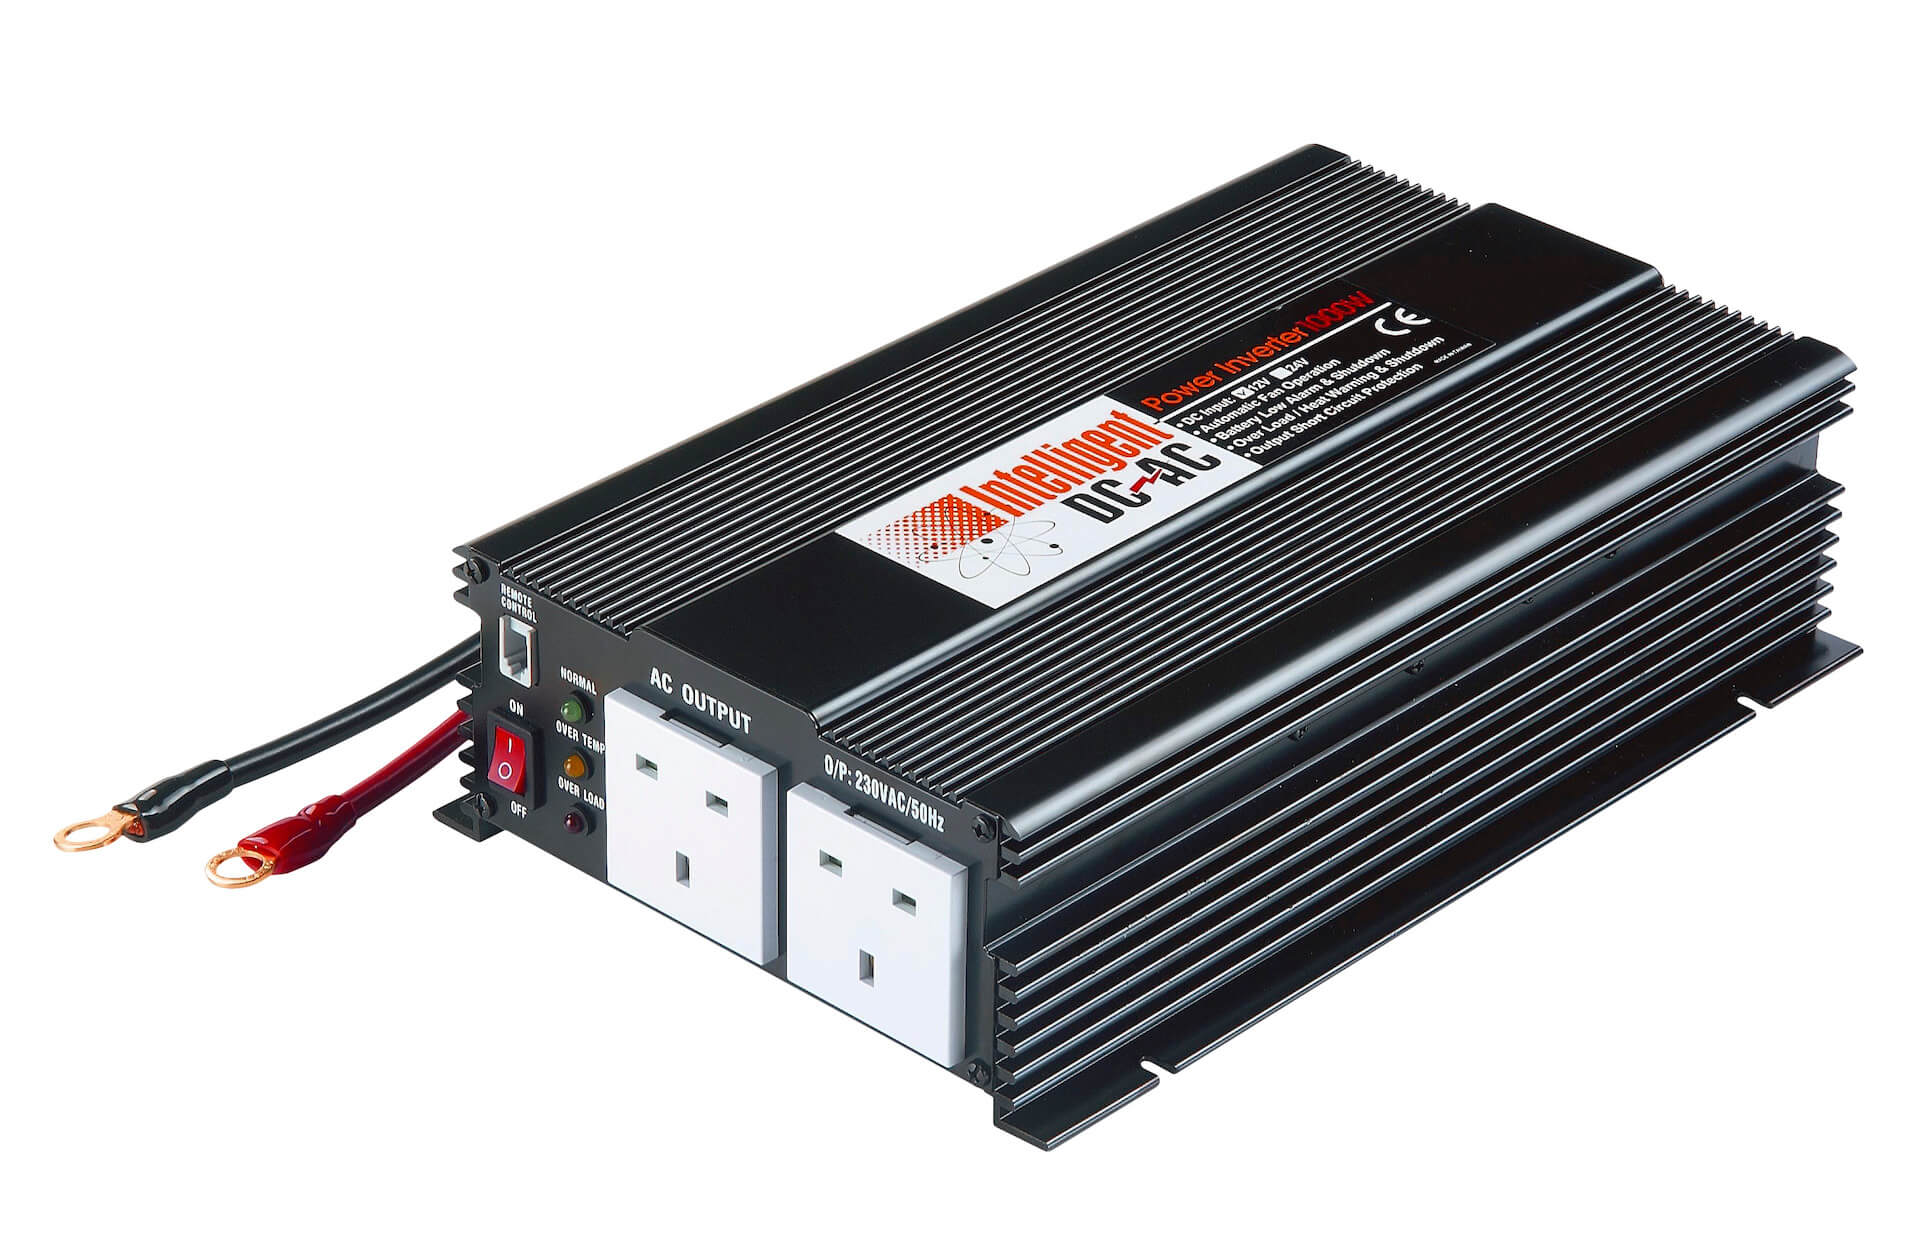 SP-1500, 1500W Intelligent DC-AC® Power Inverter with Microcontroller